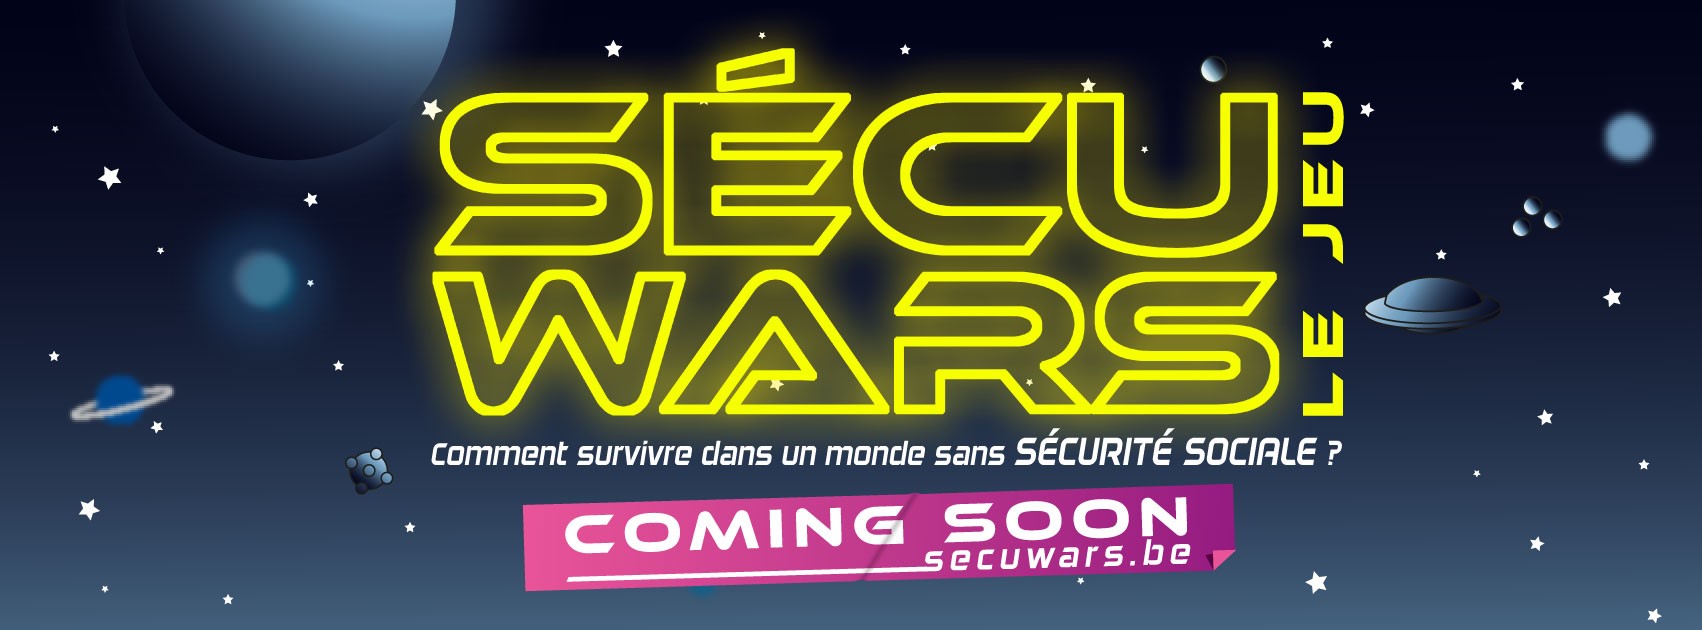 FbSecuWars CoverPhoto3A